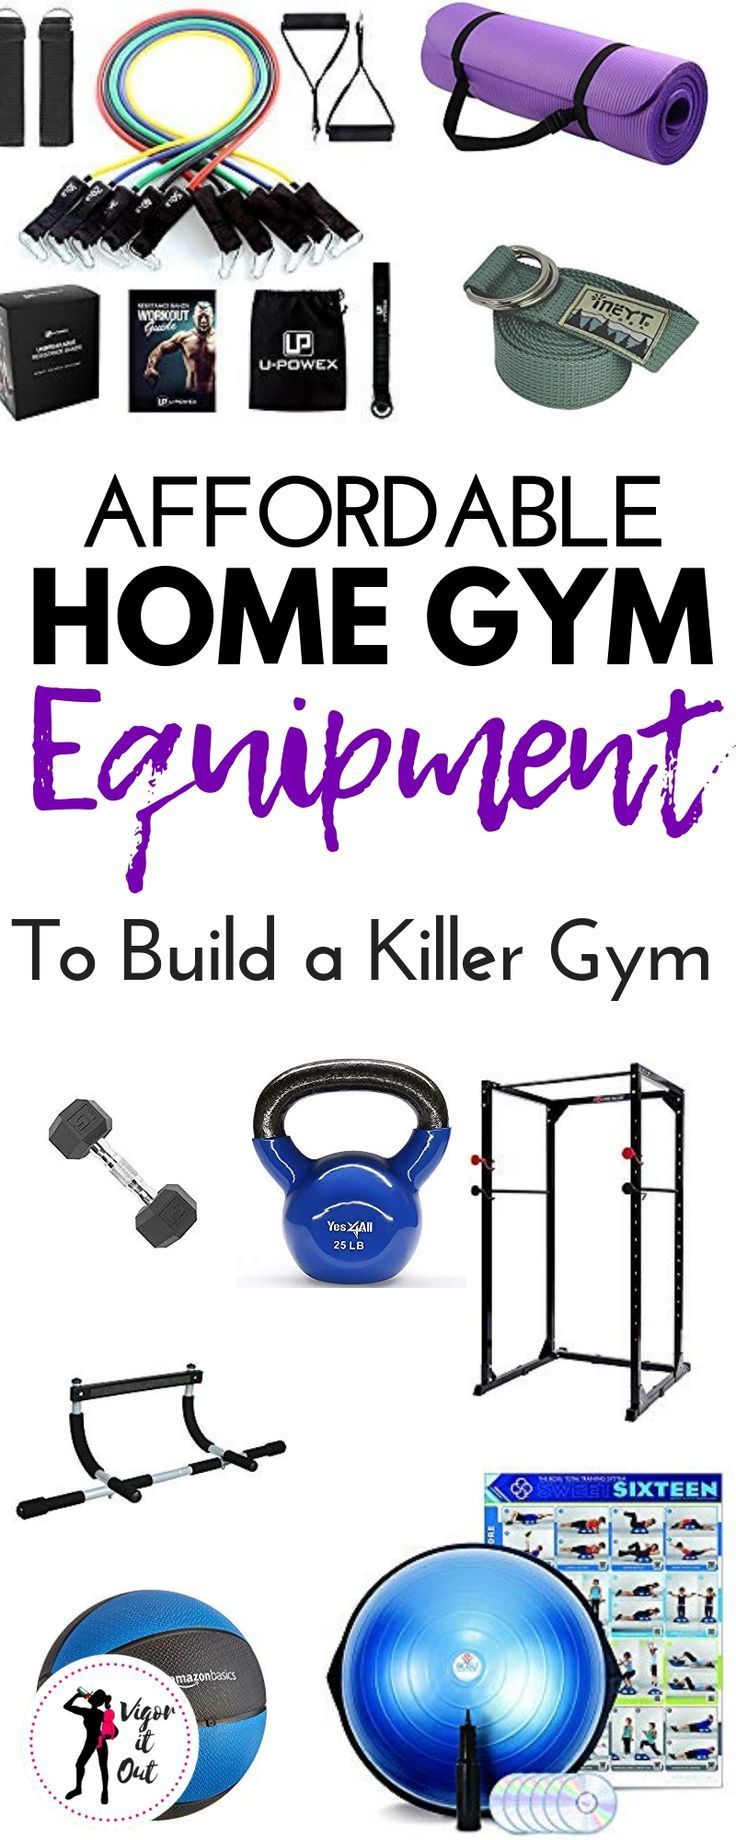 The Best Affordable Home Gym Equipment List for your Workouts -   13 fitness Gym equipment ideas